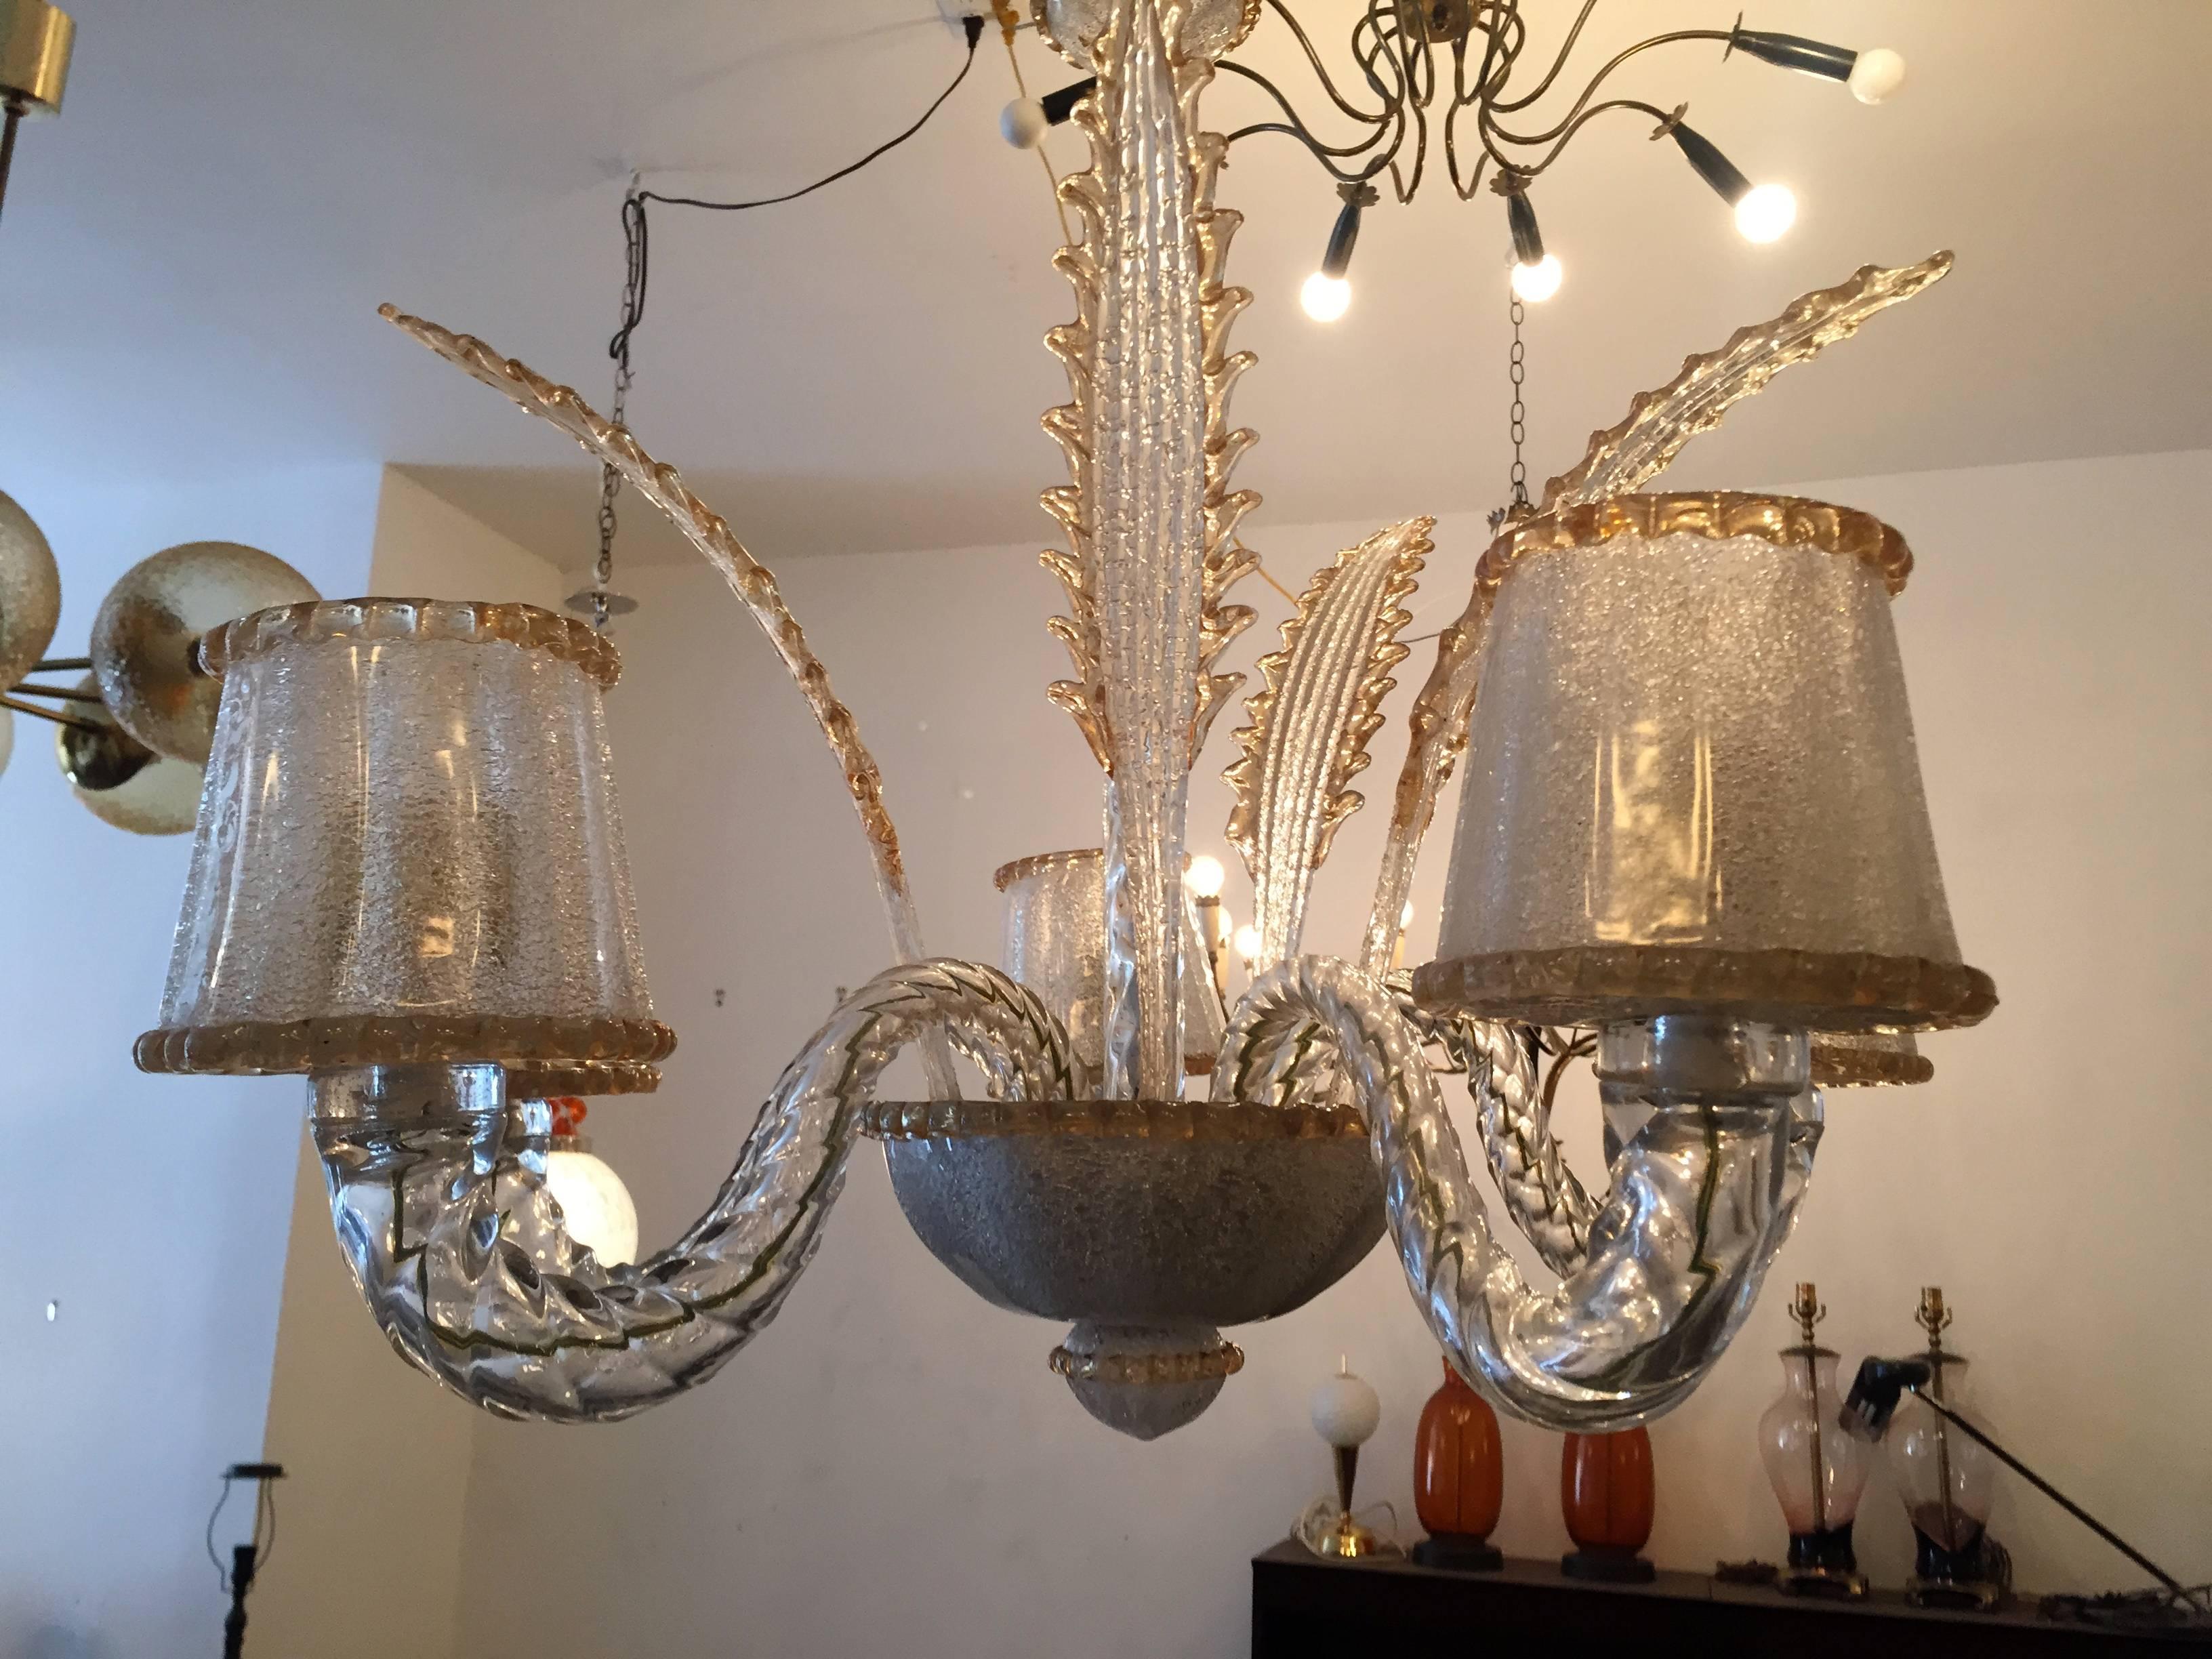 A wonderful handblown Murano glass chandelier composed of five arms, leaves and shades in lights white/clear bubbled glass with a gold infused accents by the famed glass company, Barovier. Rewired with canopy.